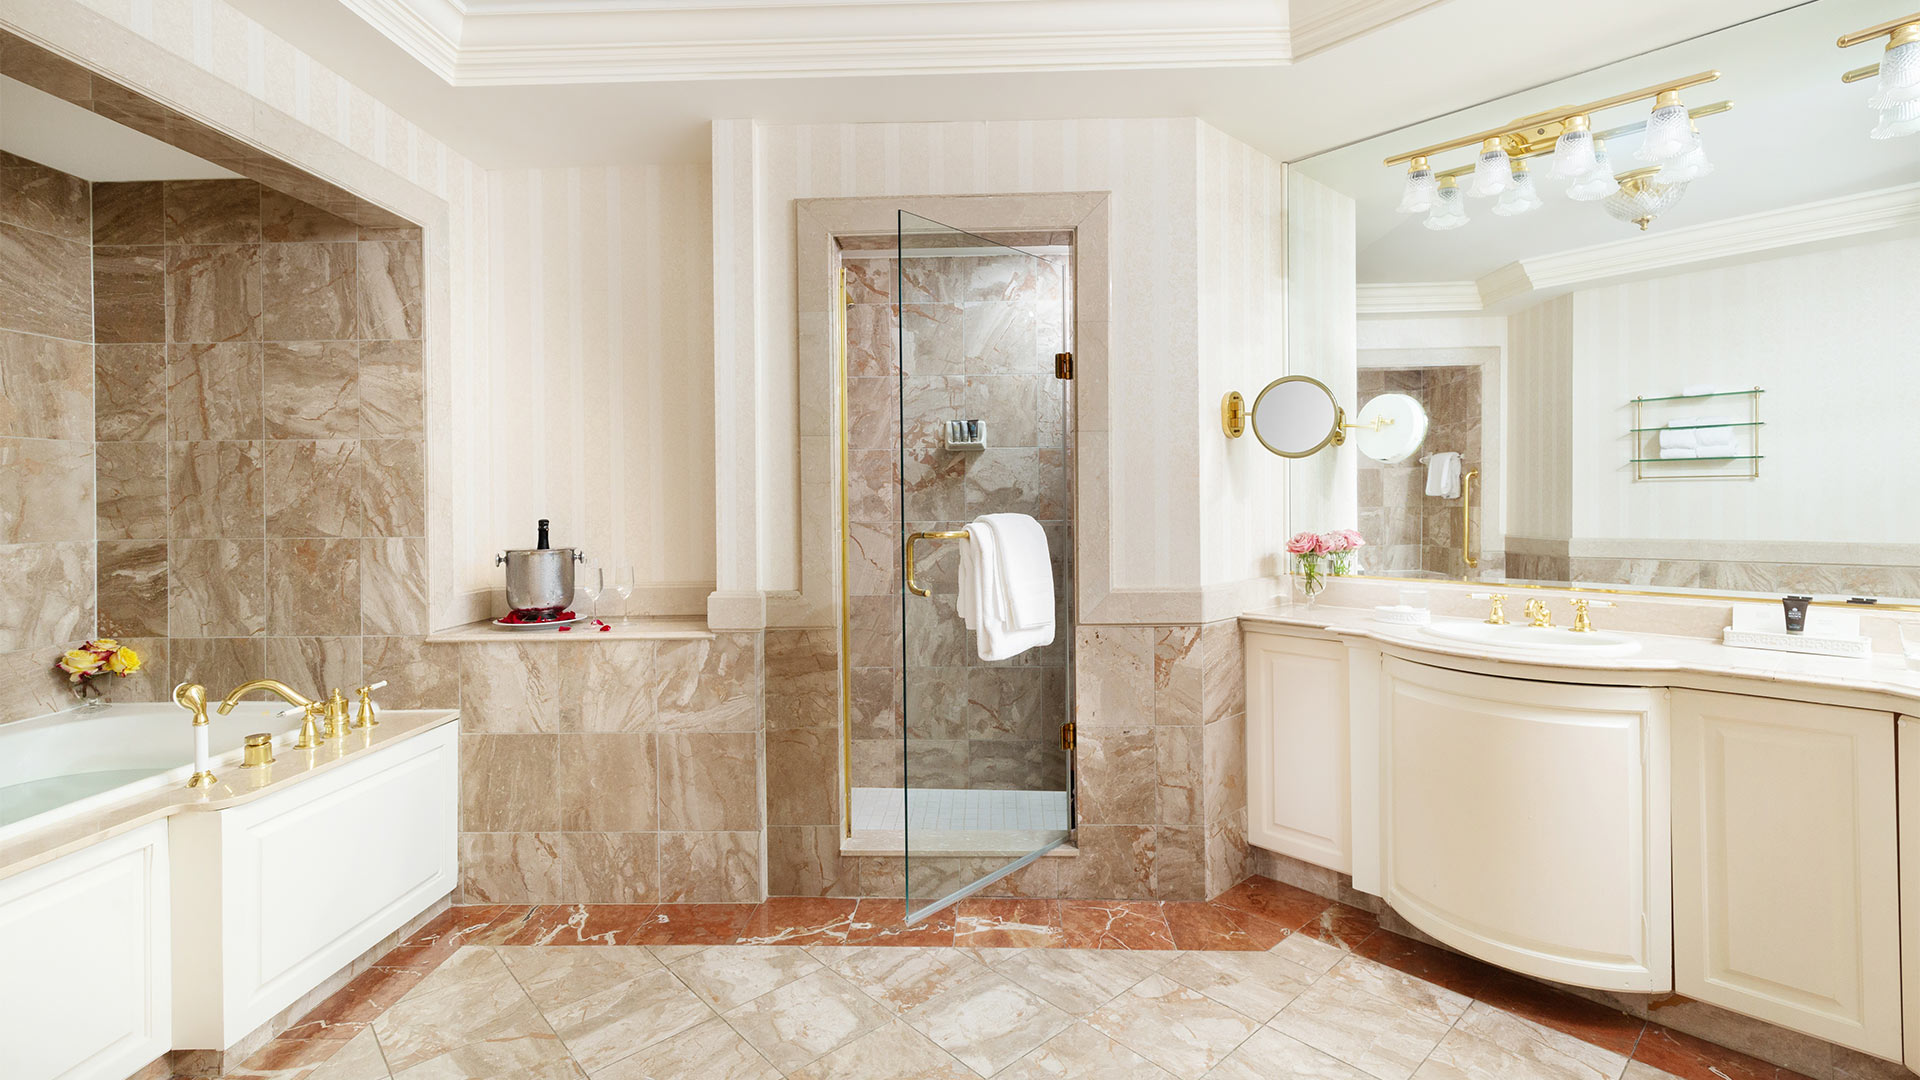 interior shot of the suite's bathroom. The bathroom has neutral beige tiling. There is a large sink and mirror across from a whirlpool bathtub. In between the sink and bathtub is a walk in shower.